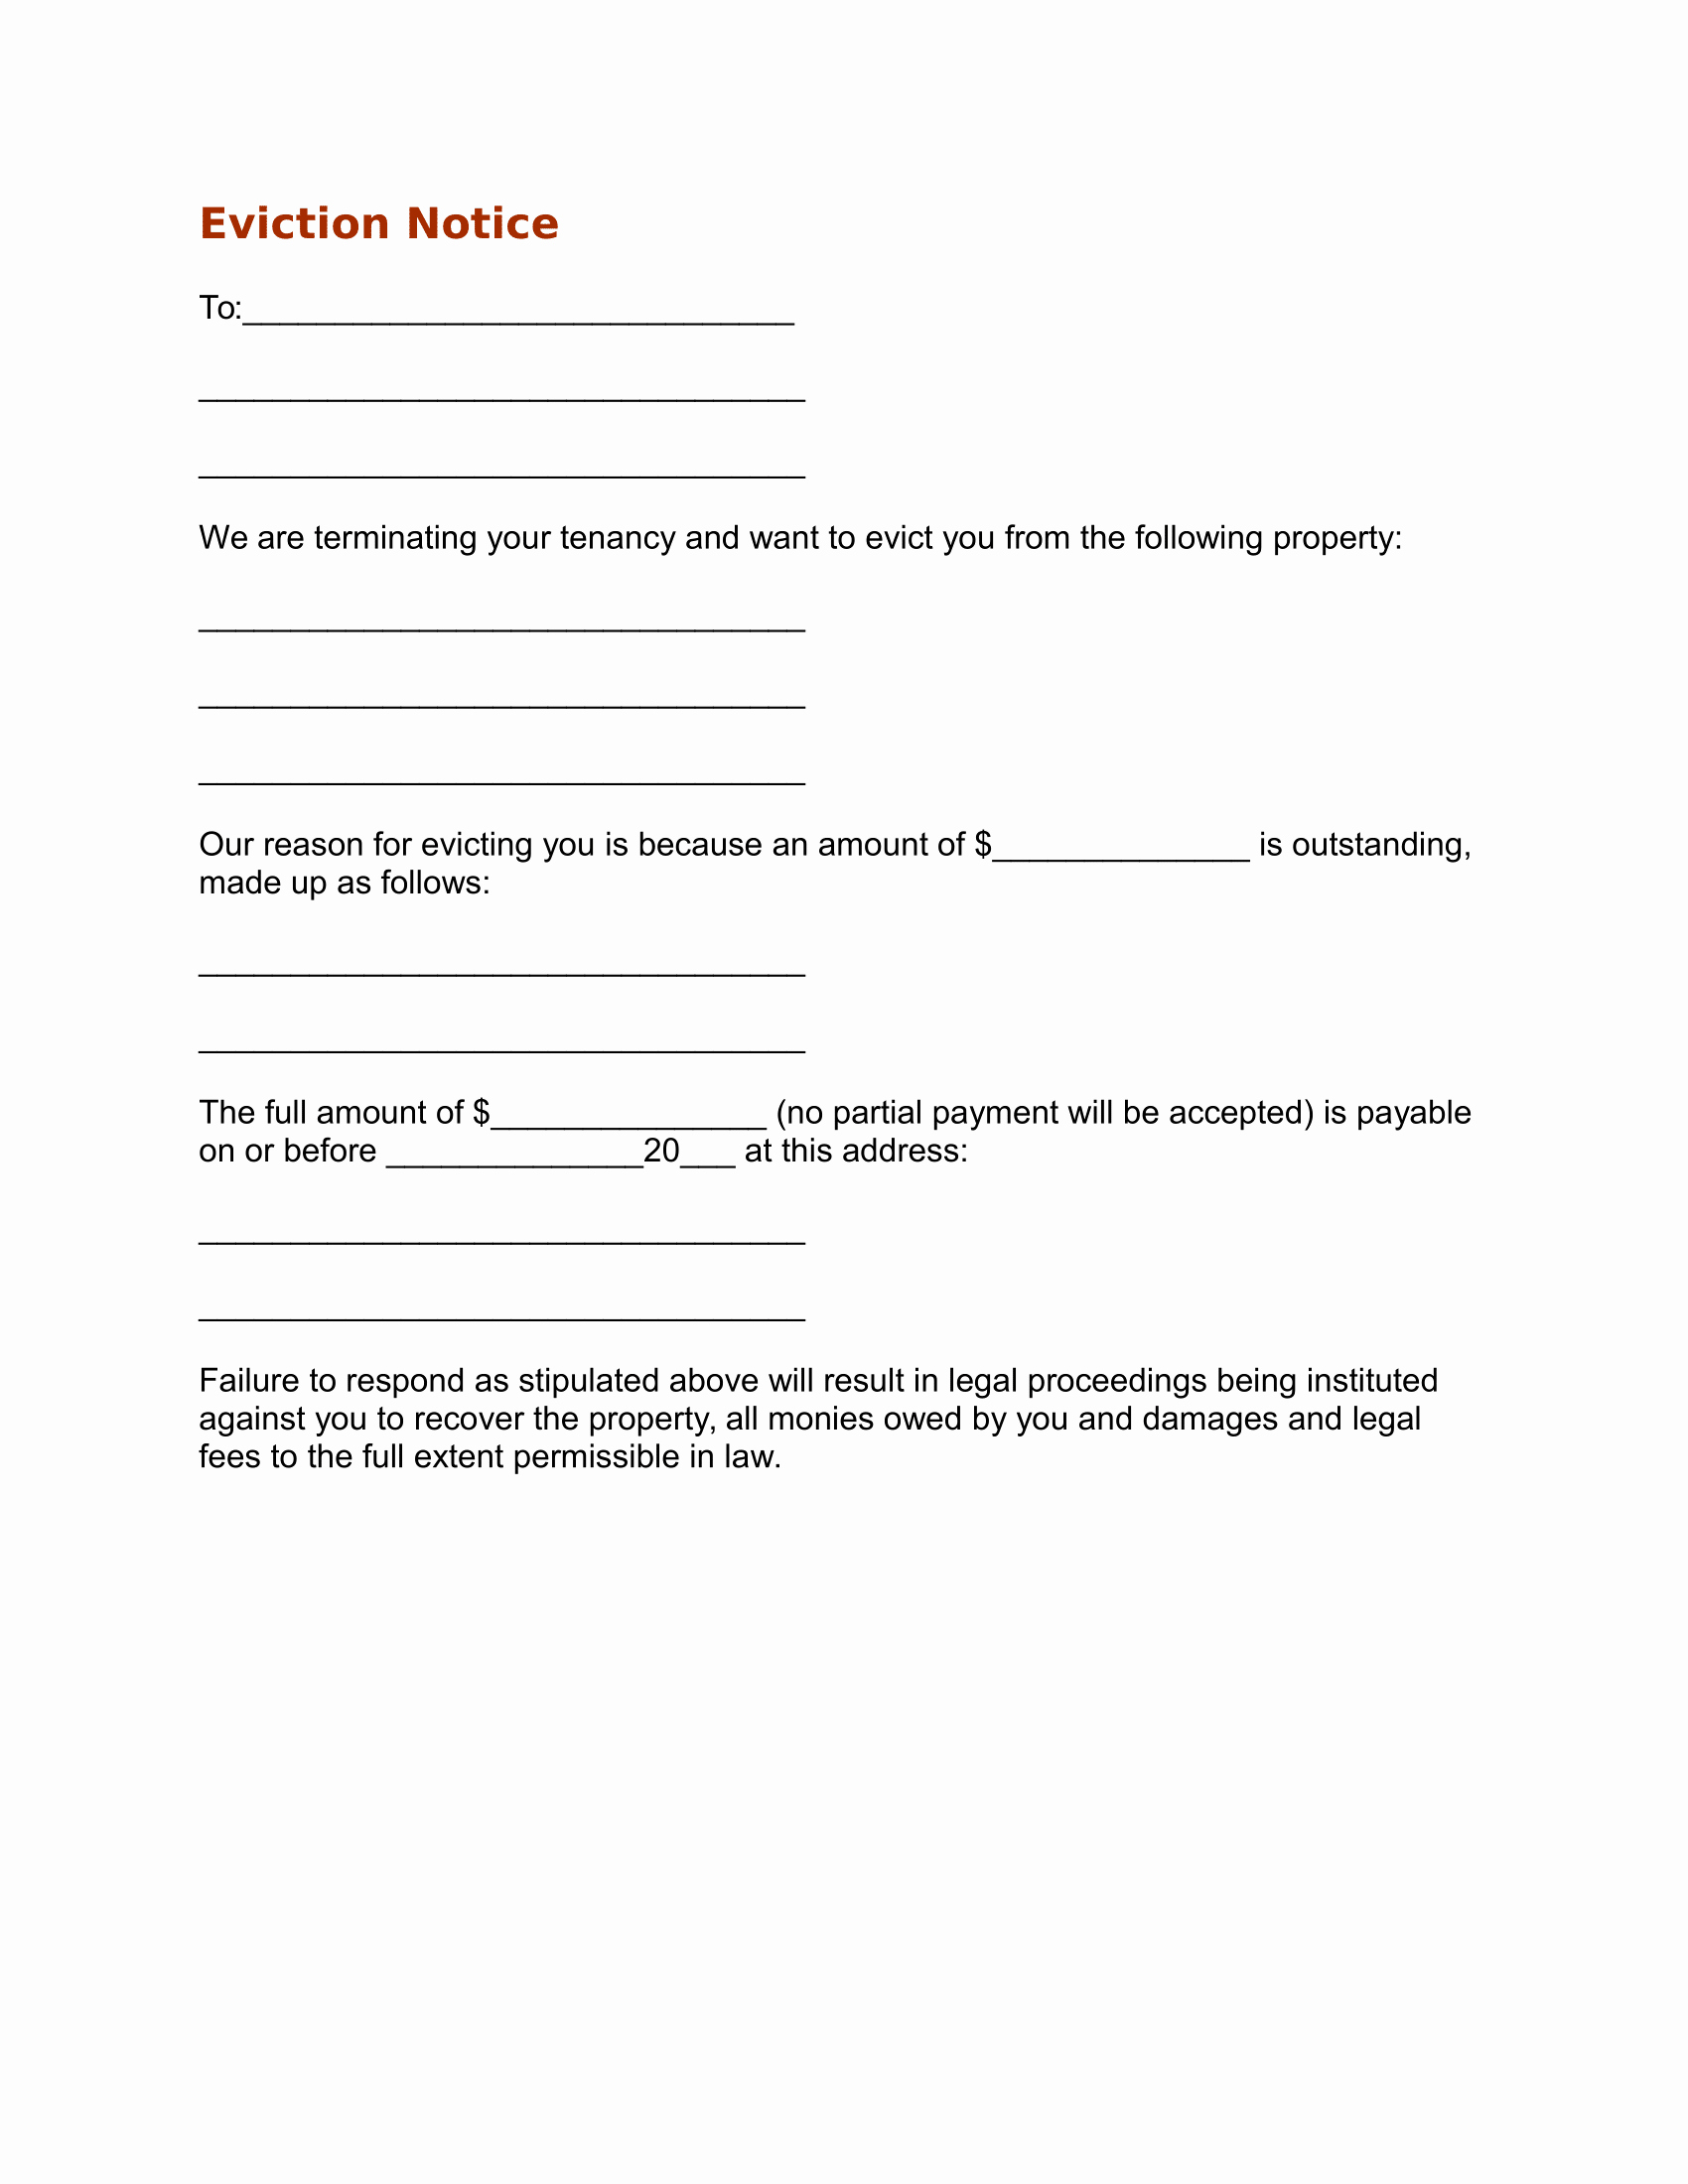 Eviction Notice Template Pdf Awesome forms Download Free Business Letter Templates forms